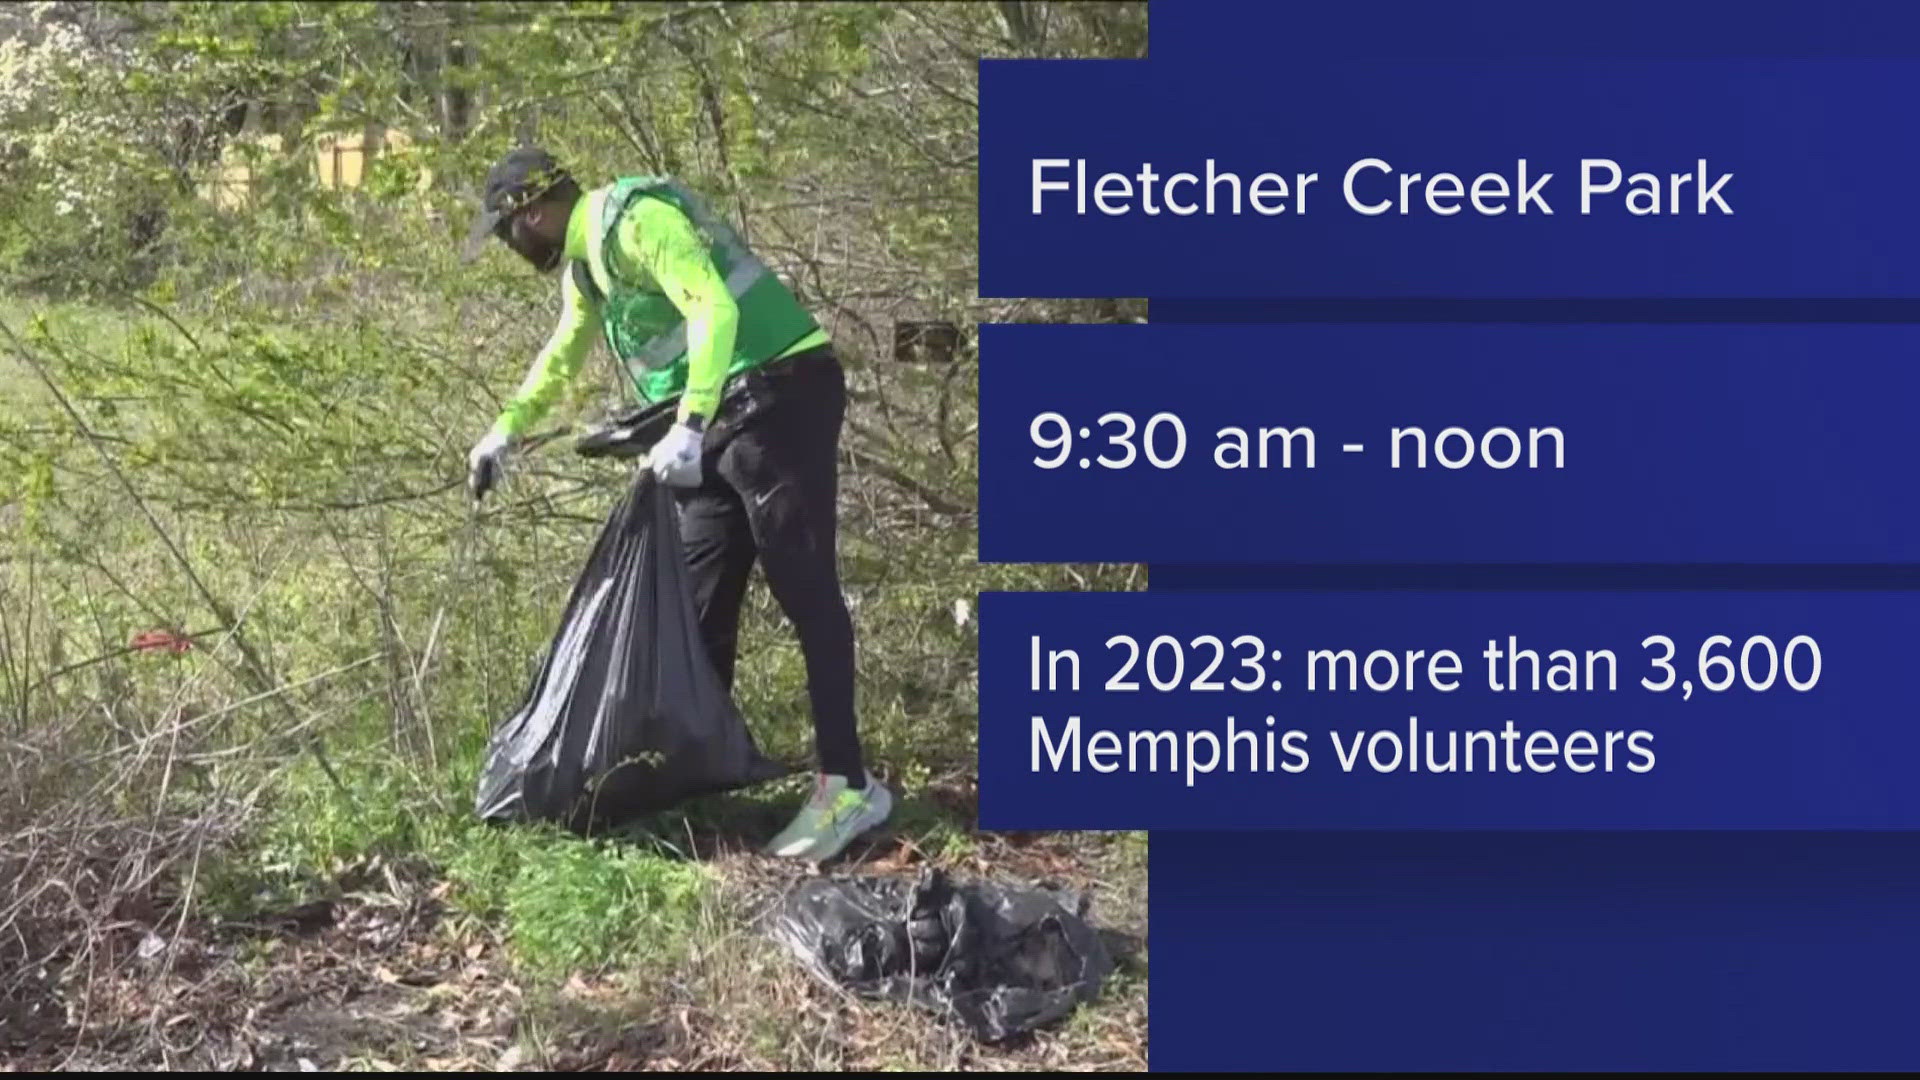 County Commissioner Shante Avant and Memphis City Beautiful sponsoring a neighborhood cleanup at Fletcher Creek Park starting at 9:30 and runs until noon